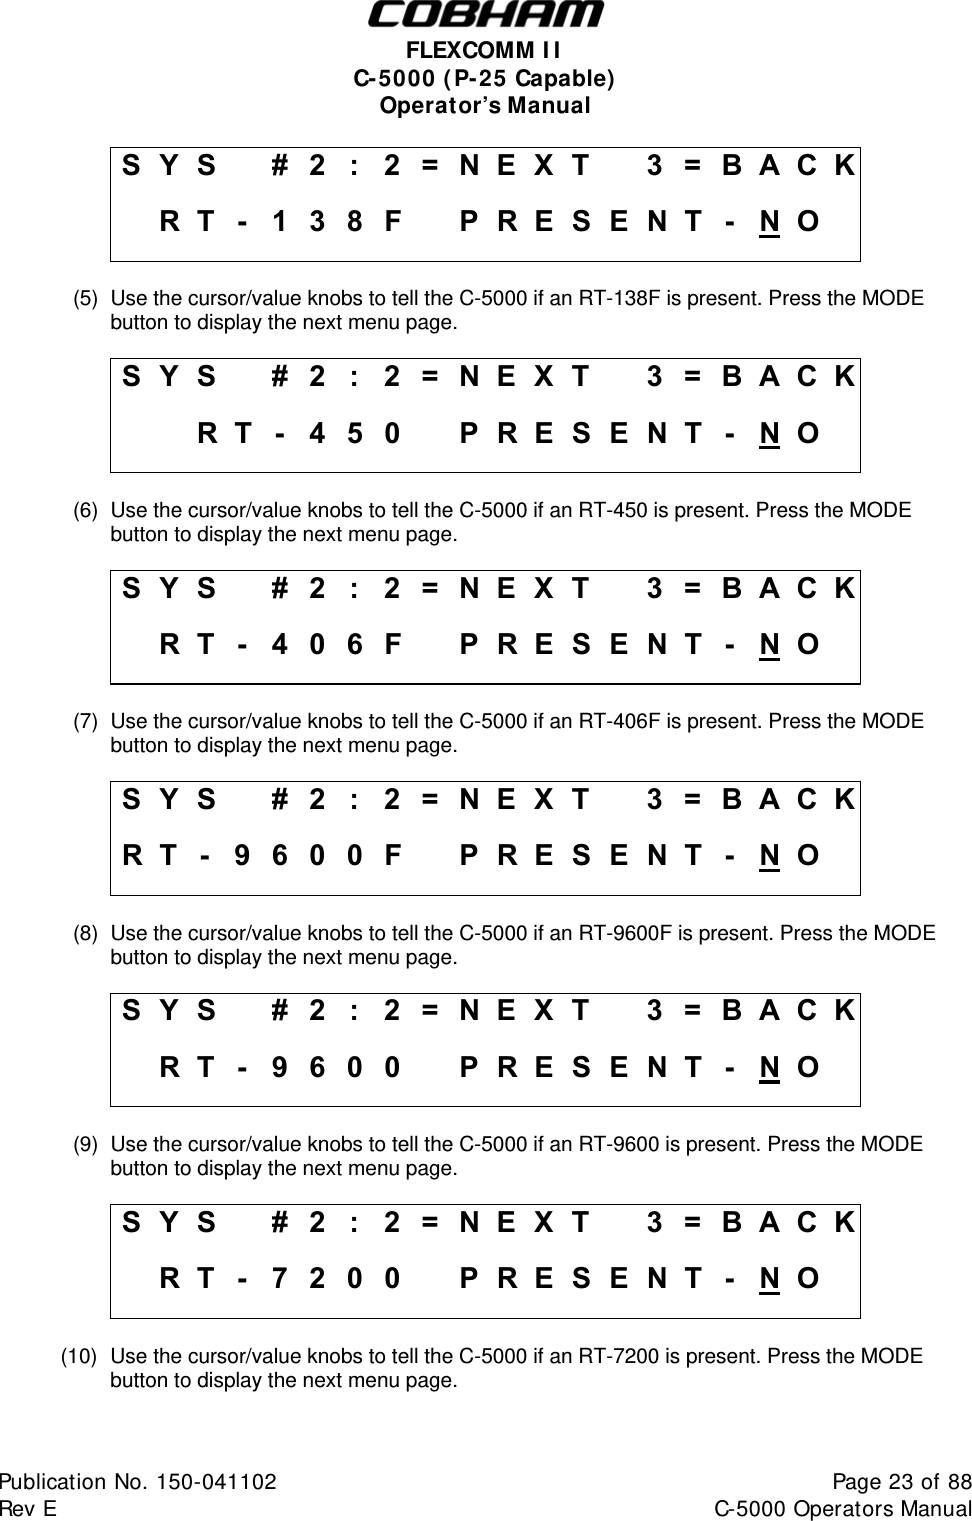  FLEXCOMM I I  C-5000 ( P-25 Capable)  Operator’s Manual S Y S    #  2  :  2 = N E X T   3 = B A C K   R T -  1 3 8 F   PRESENT - N O   (5)  Use the cursor/value knobs to tell the C-5000 if an RT-138F is present. Press the MODE button to display the next menu page.  S Y S    #  2  :  2 = N E X T   3 = B A C K    R T - 4 50  PRESENT - N O   (6)  Use the cursor/value knobs to tell the C-5000 if an RT-450 is present. Press the MODE button to display the next menu page.  S Y S    #  2  :  2 = N E X T   3 = B A C K   R T -  4 0 6 F   PRESENT - N O   (7)  Use the cursor/value knobs to tell the C-5000 if an RT-406F is present. Press the MODE button to display the next menu page.  S Y S    #  2  :  2 = N E X T   3 = B A C K R T -  9 6 0 0F   PRESENT - N O   (8)  Use the cursor/value knobs to tell the C-5000 if an RT-9600F is present. Press the MODE button to display the next menu page.  S Y S    #  2  :  2 = N E X T   3 = B A C K   R T -  9 6 0 0   PRESENT - N O   (9)  Use the cursor/value knobs to tell the C-5000 if an RT-9600 is present. Press the MODE button to display the next menu page.  S Y S    #  2  :  2 = N E X T   3 = B A C K   R T -  7 2 0 0   PRESENT - N O   (10)  Use the cursor/value knobs to tell the C-5000 if an RT-7200 is present. Press the MODE button to display the next menu page.  Publication No. 150-041102  Page 23 of 88  Rev E  C-5000 Operators Manual    